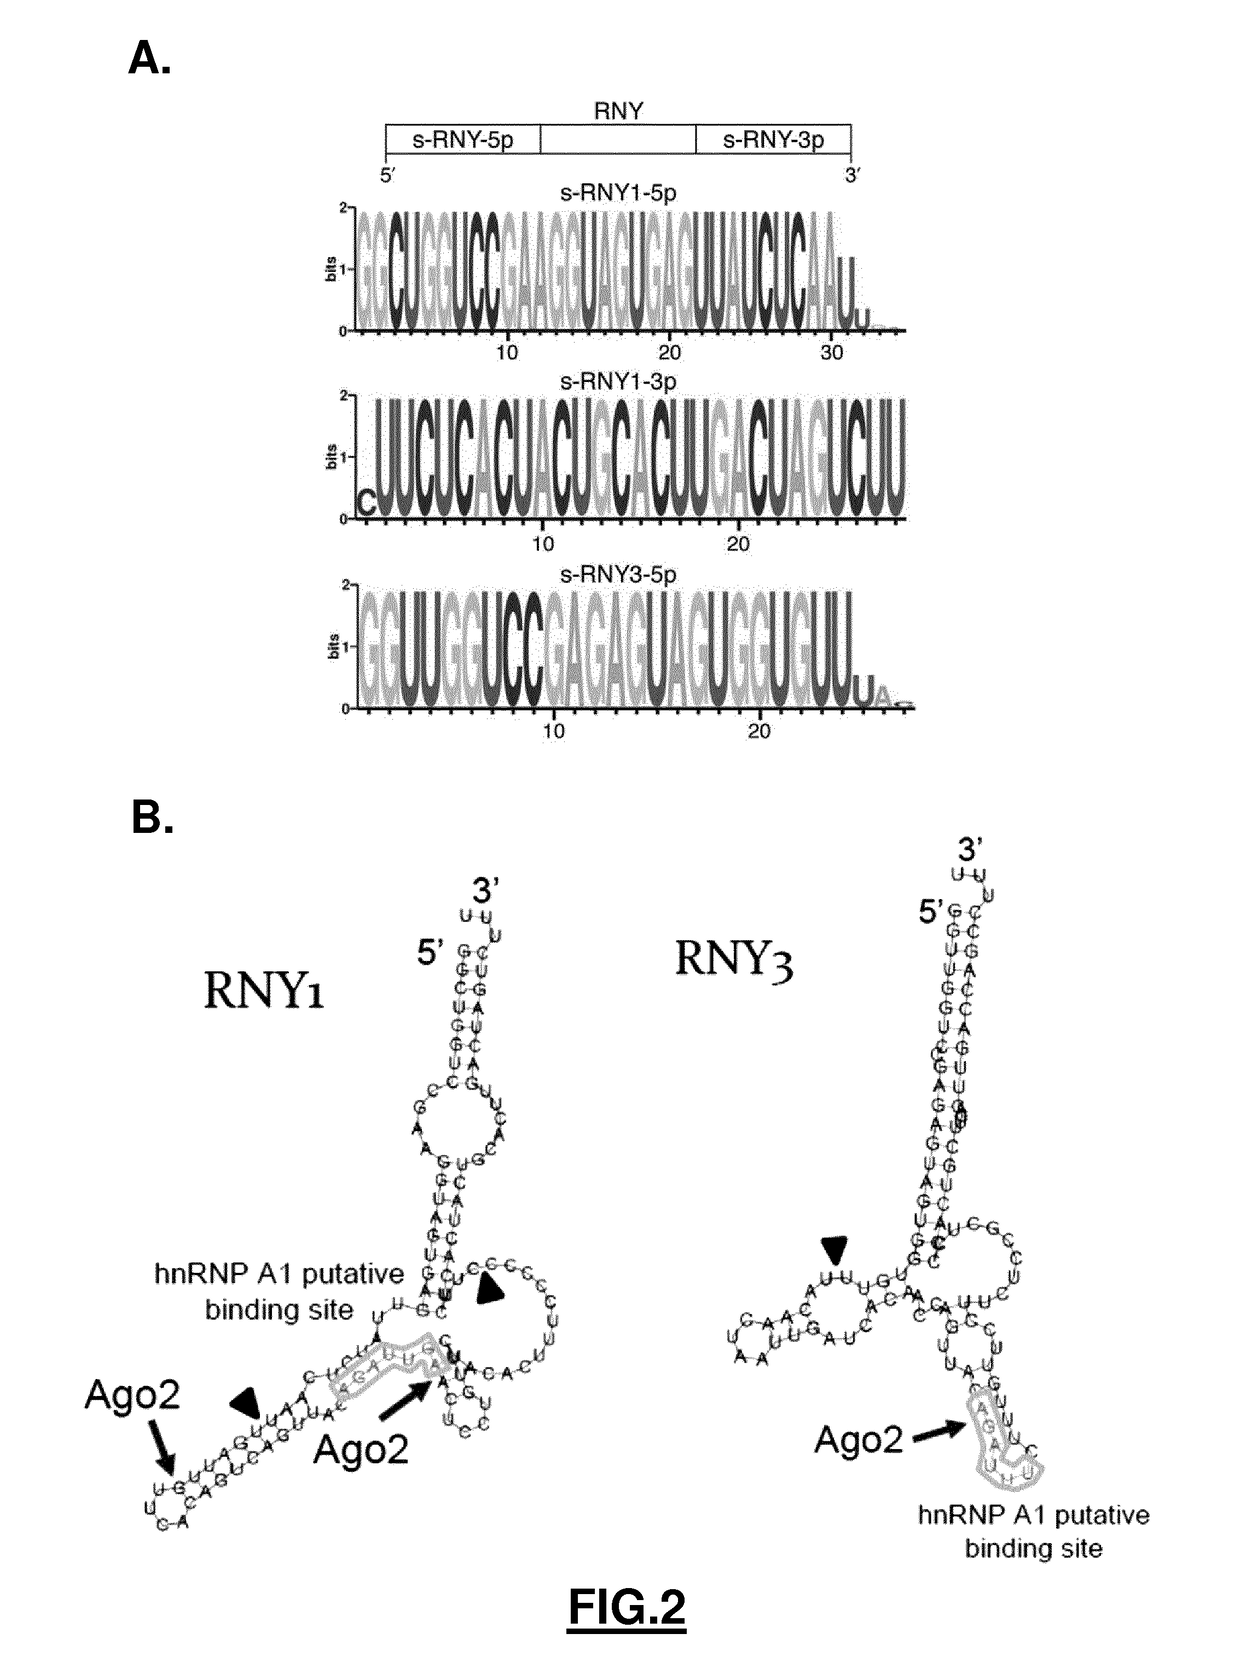 RNY-derived small RNAs as biomarkers for atherosclerosis-related disorders